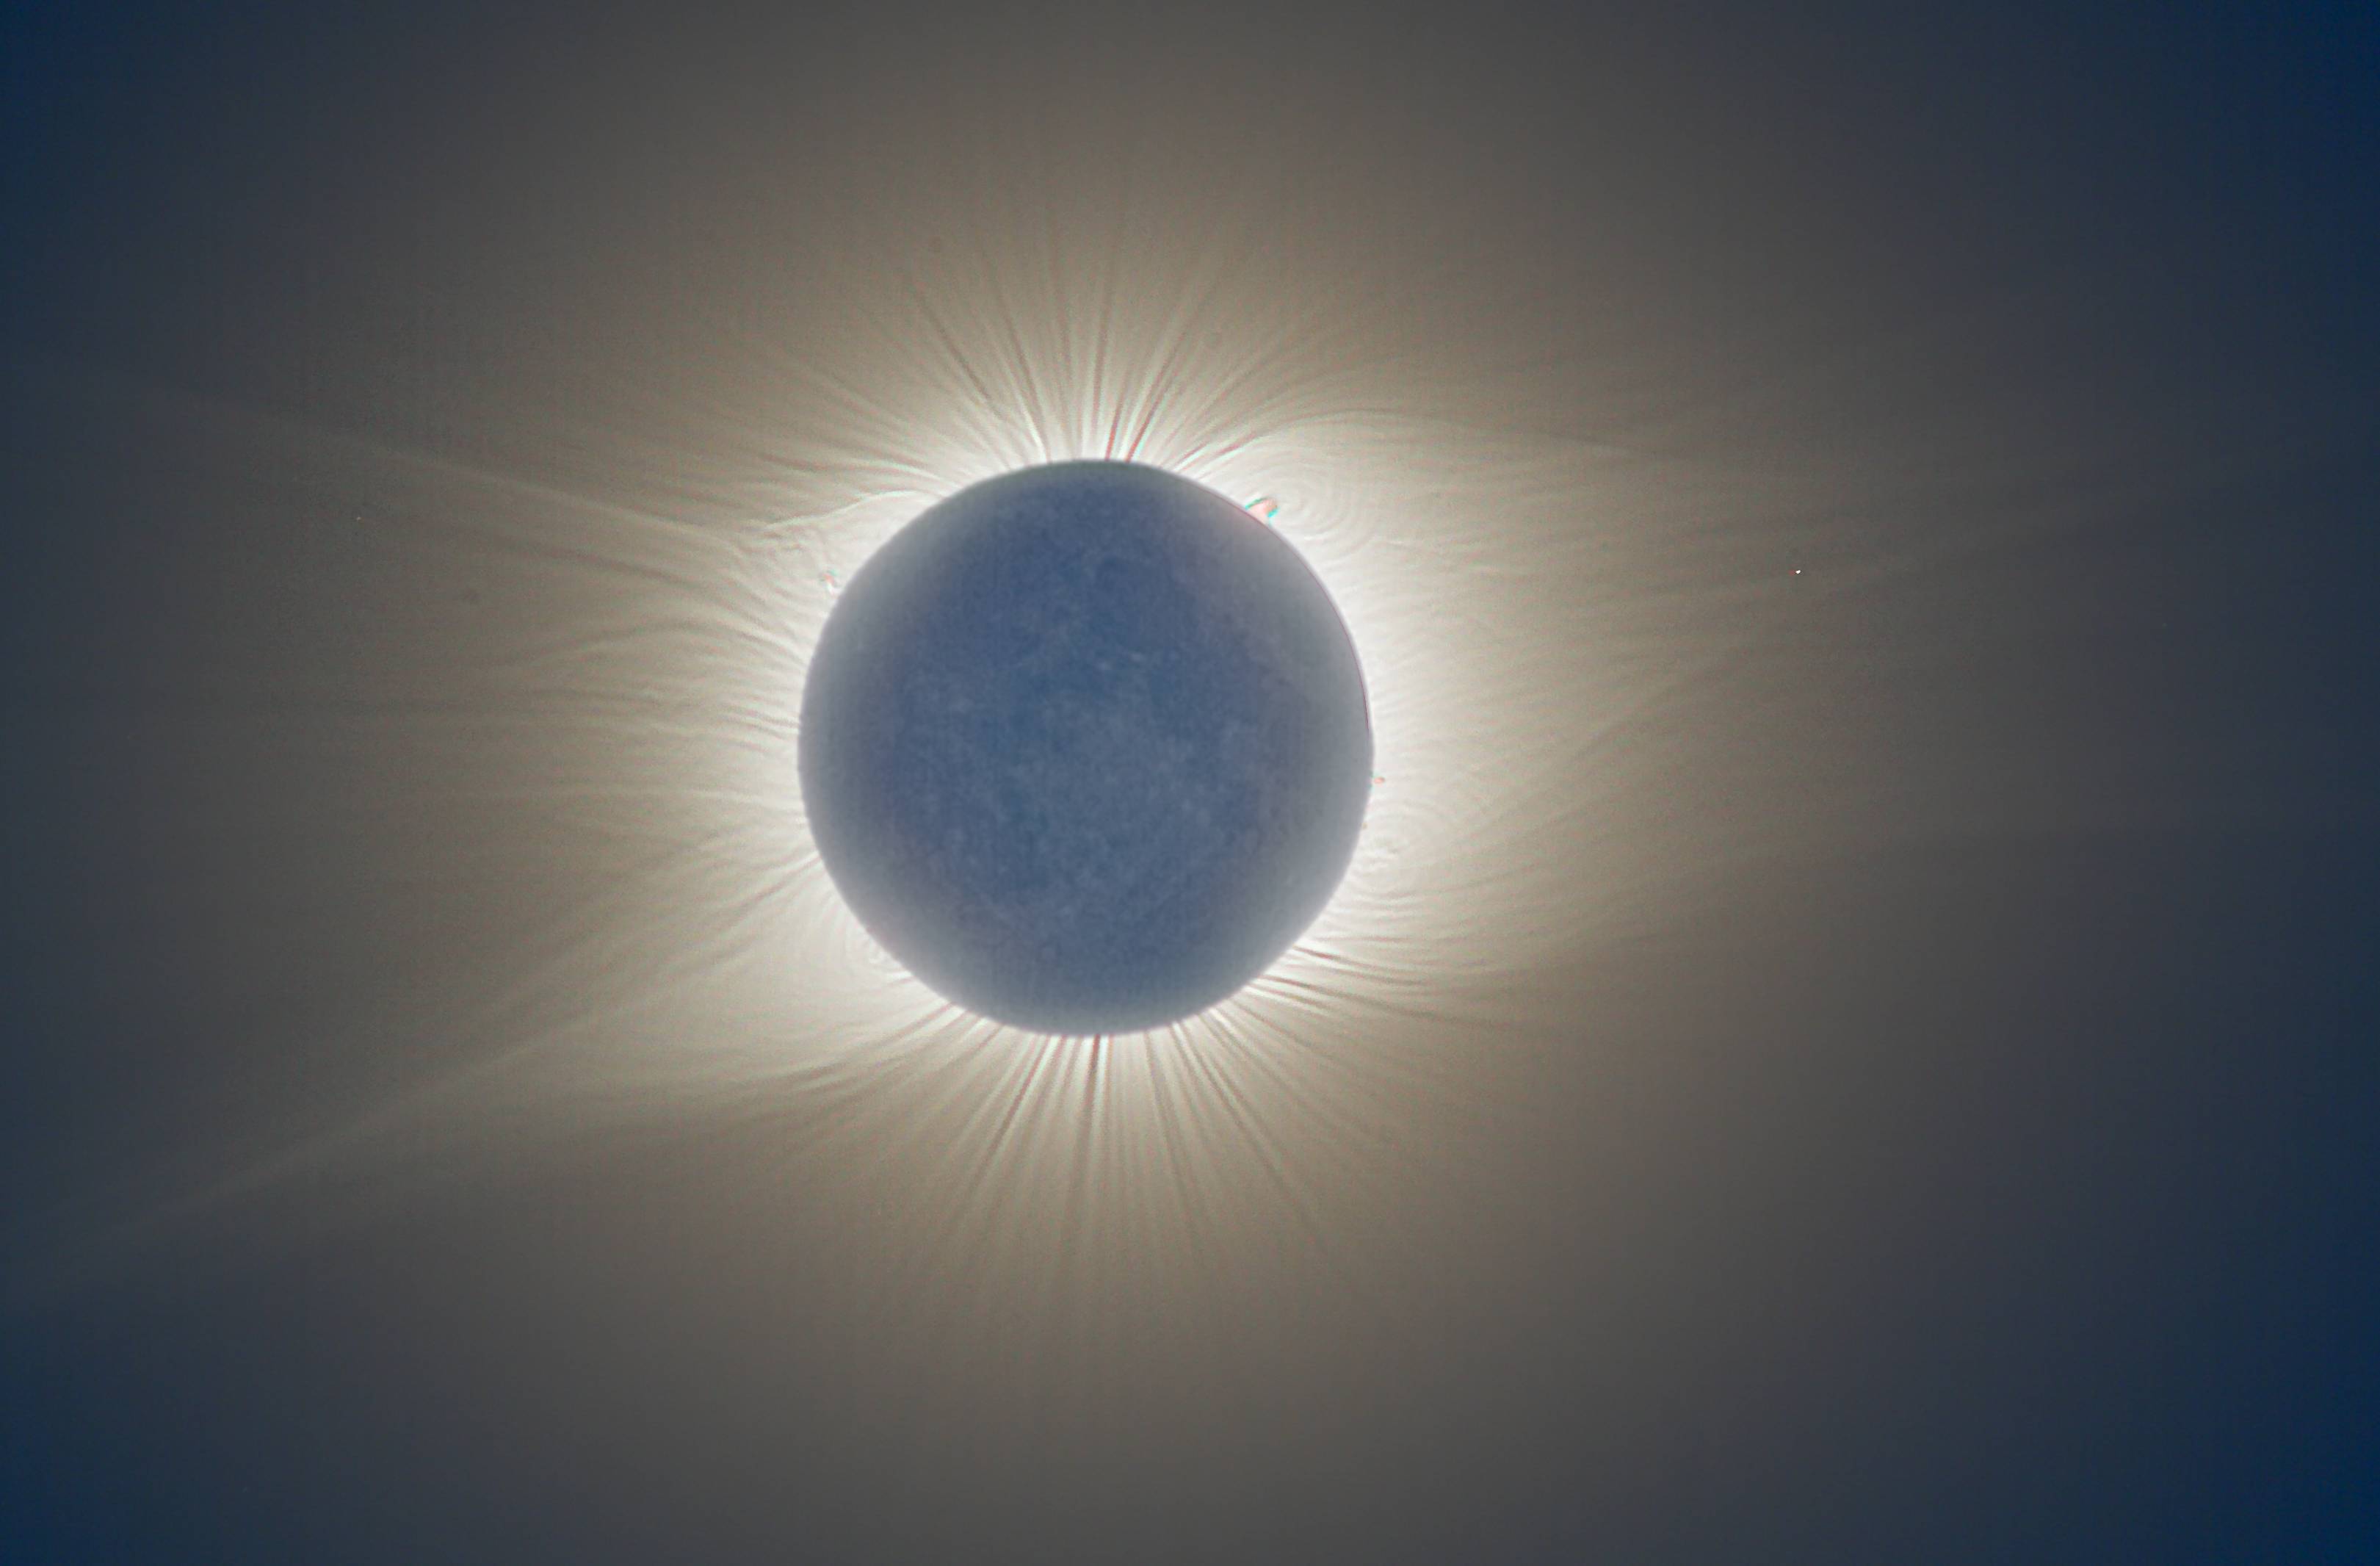 sun corona in day light images